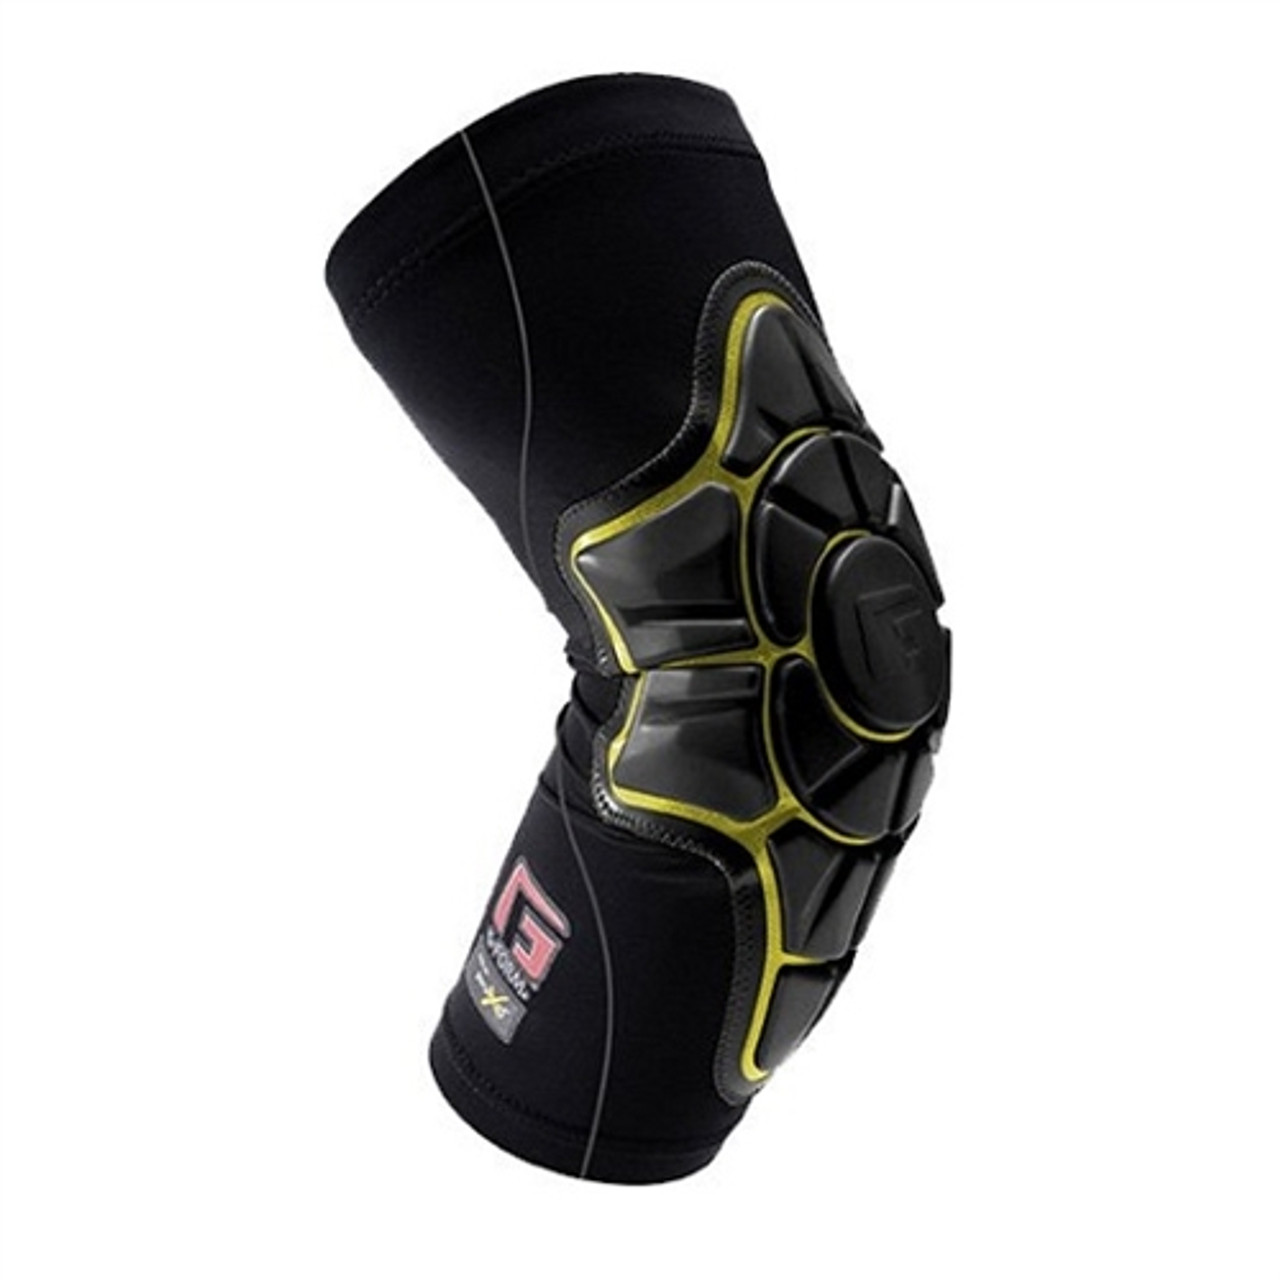 G-Form ProX Elbow Pads Black Black Yellow Large